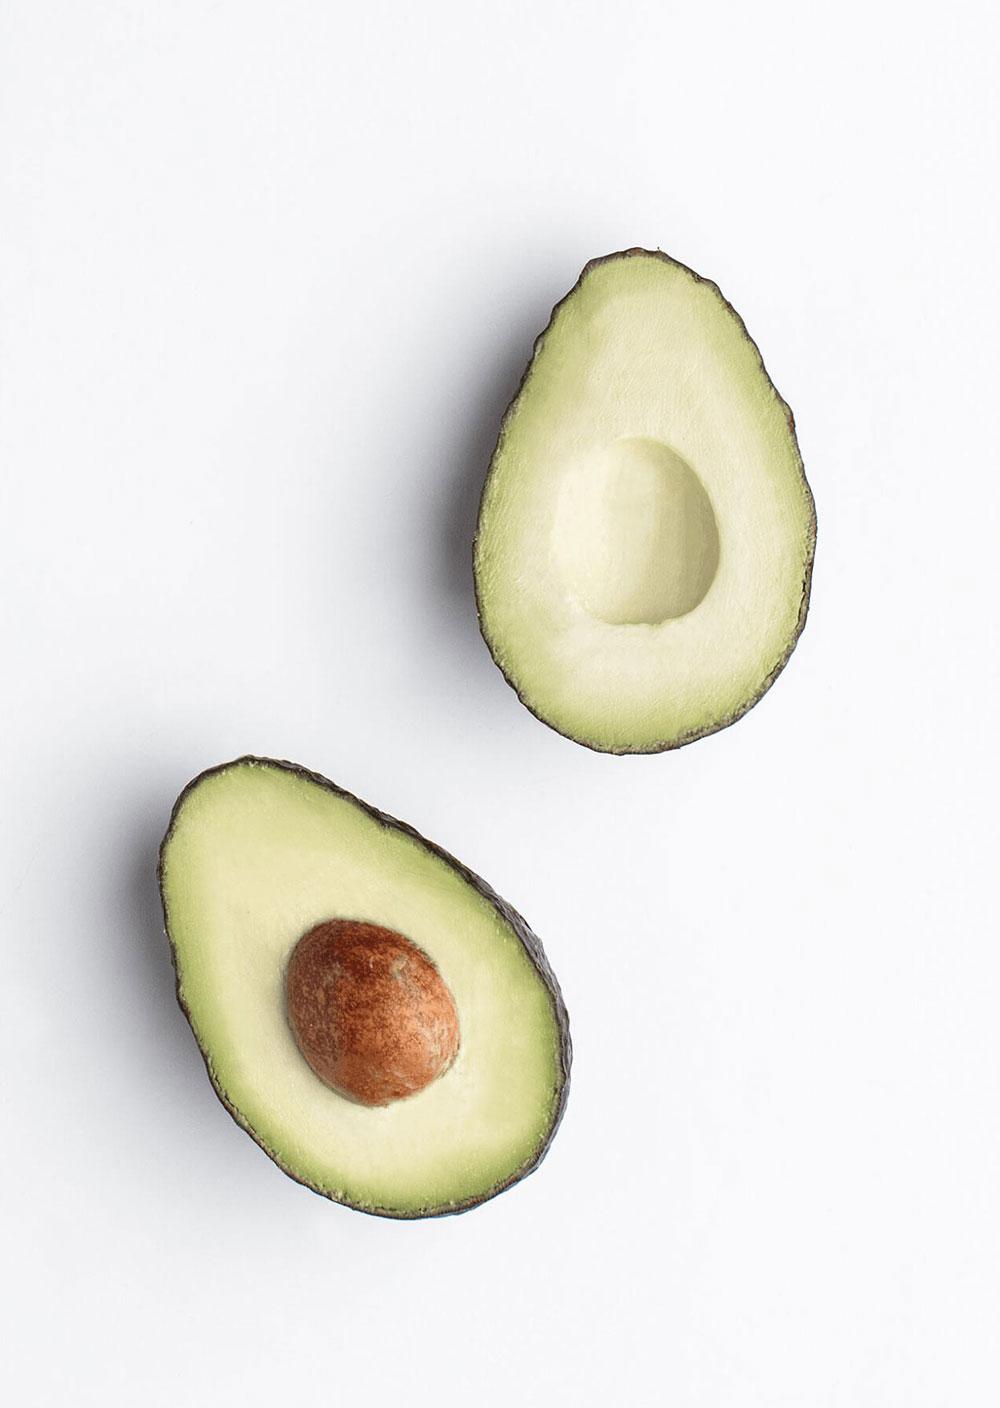 An avocado sliced in half with the pit left in on a white background.